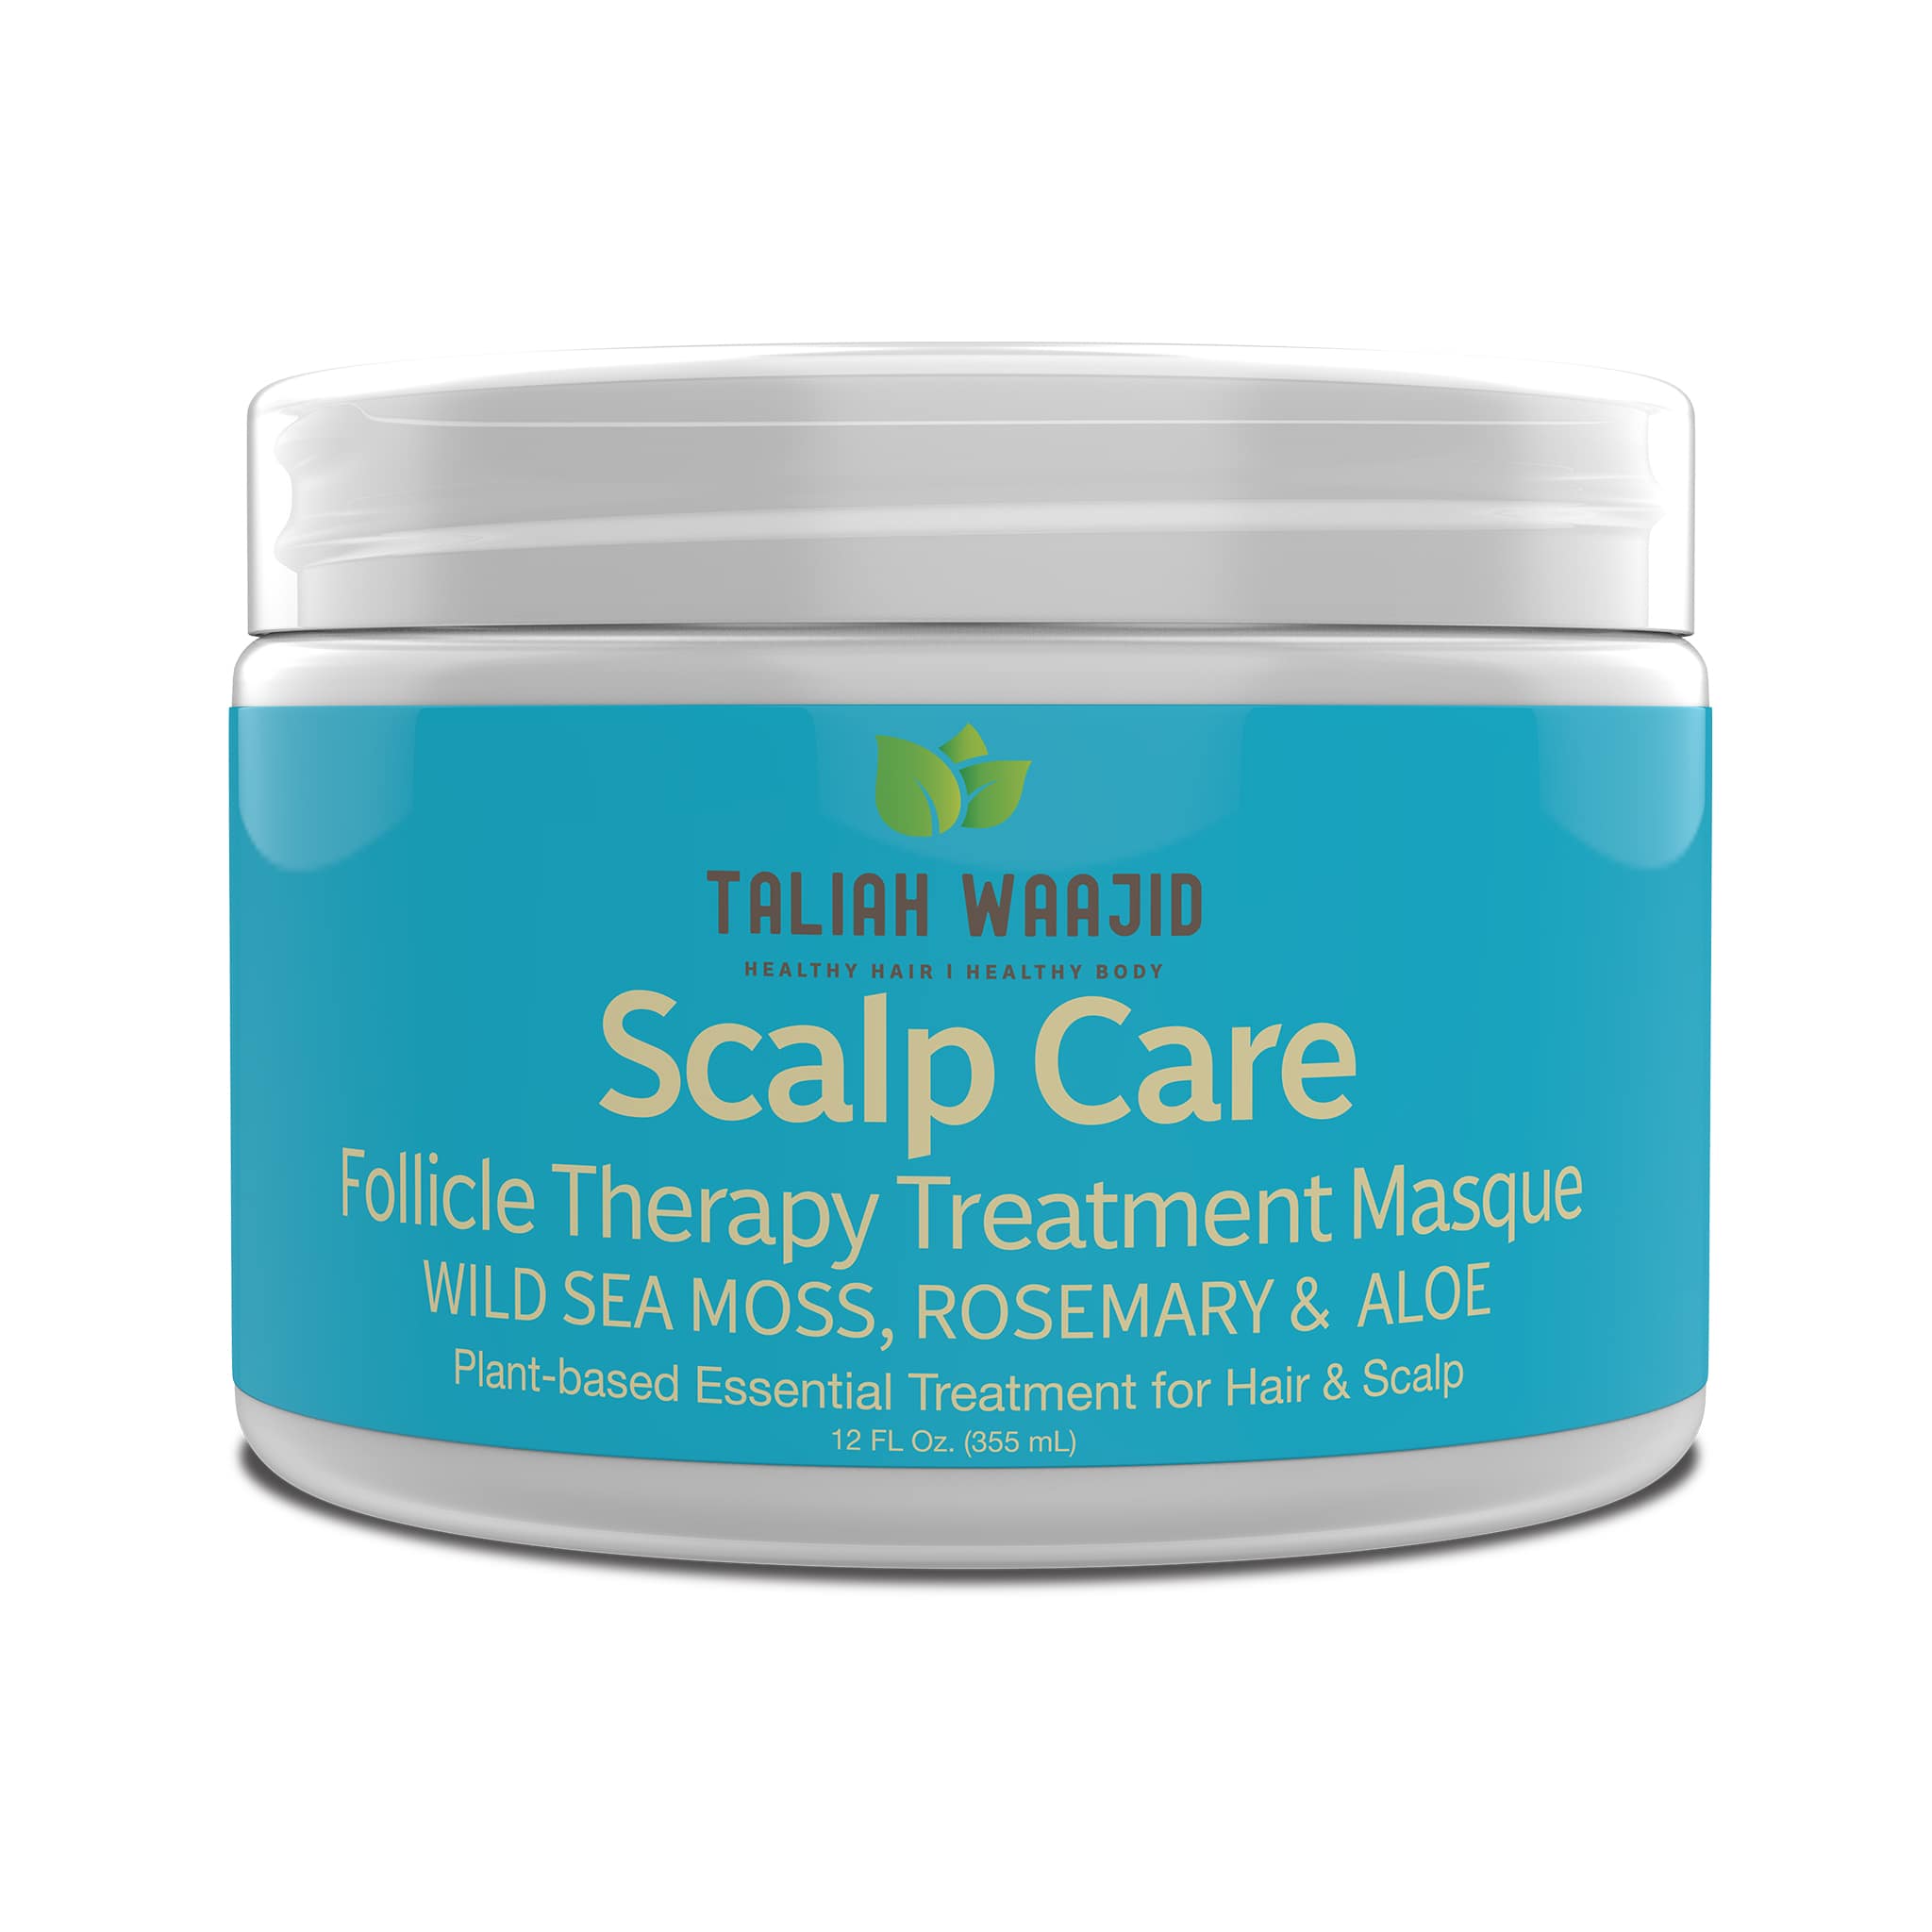 Taliah Waajid Scalp Care Follicle Therapy Treatment Masque 12oz Front View